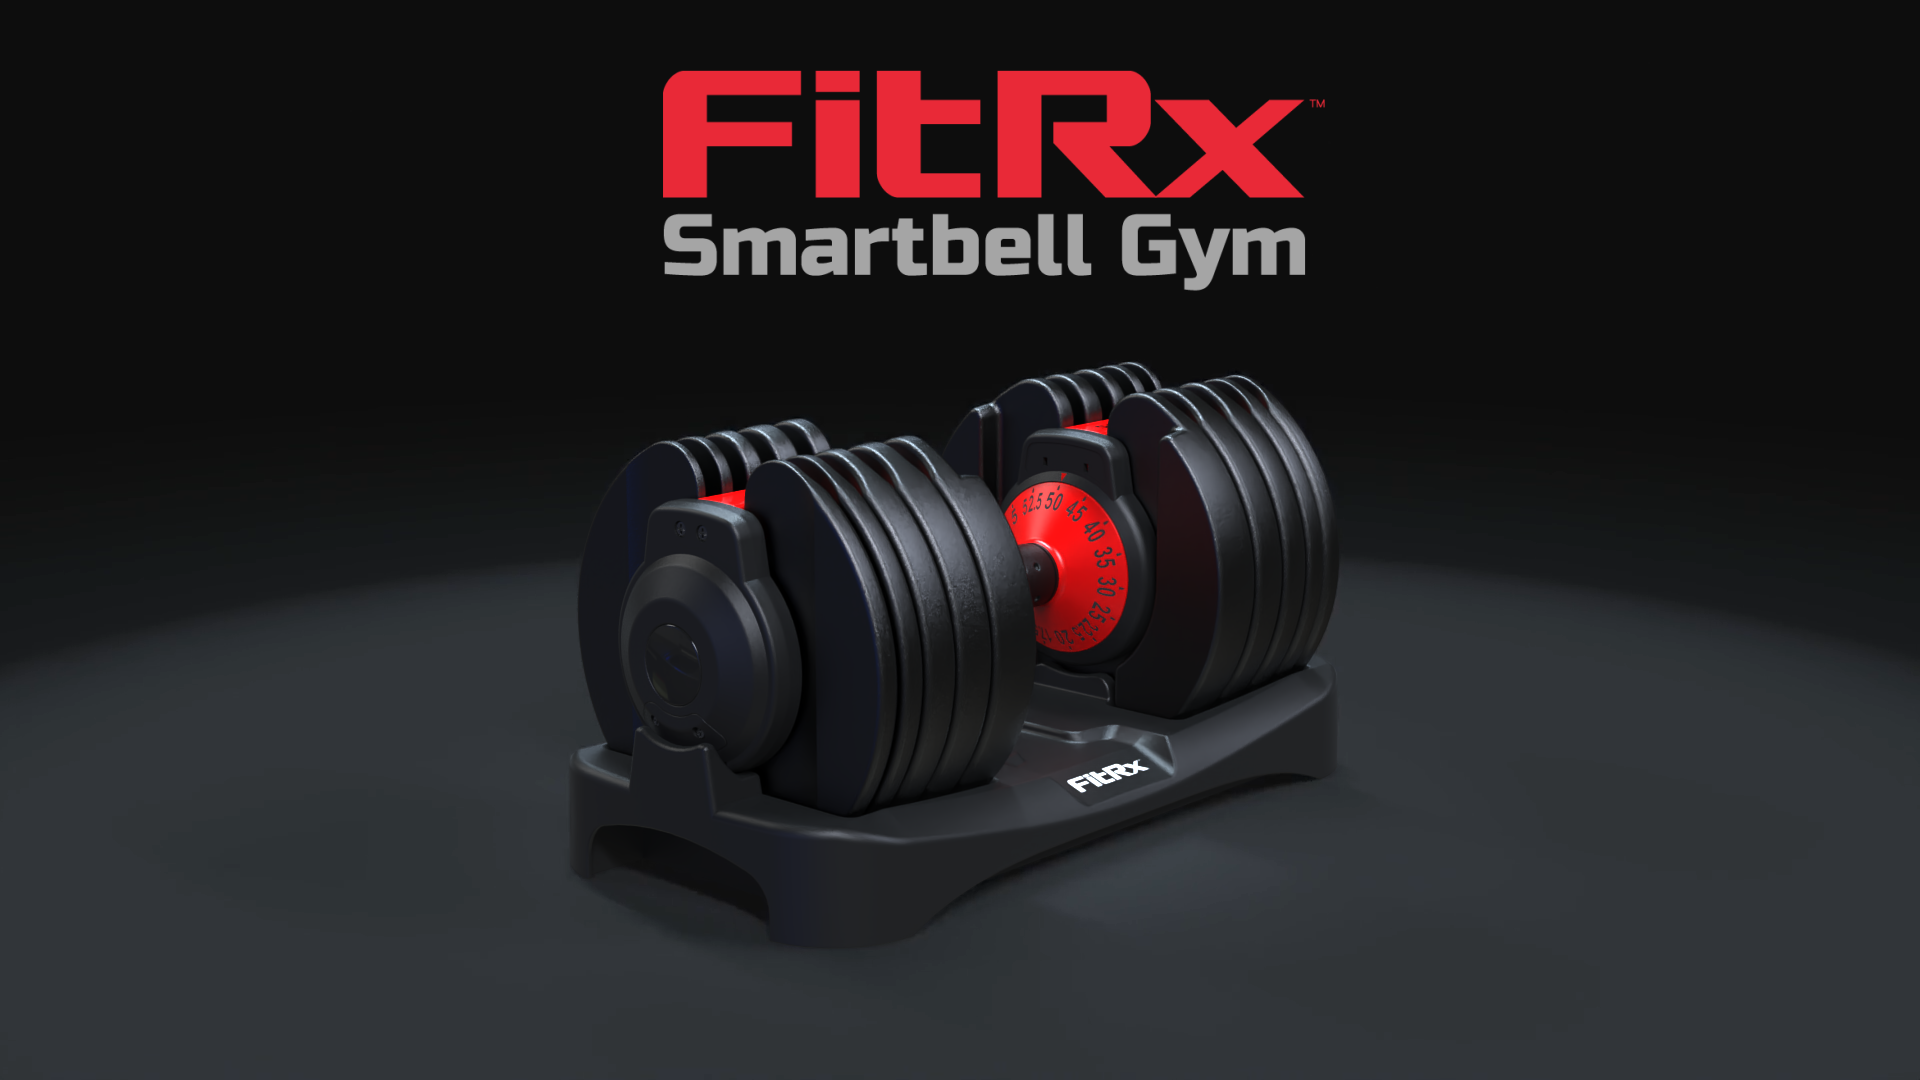 FitRx SmartBell, Quick-Select Adjustable Dumbbell, 5-52.5 lbs. Weight, Black, Single - image 2 of 12